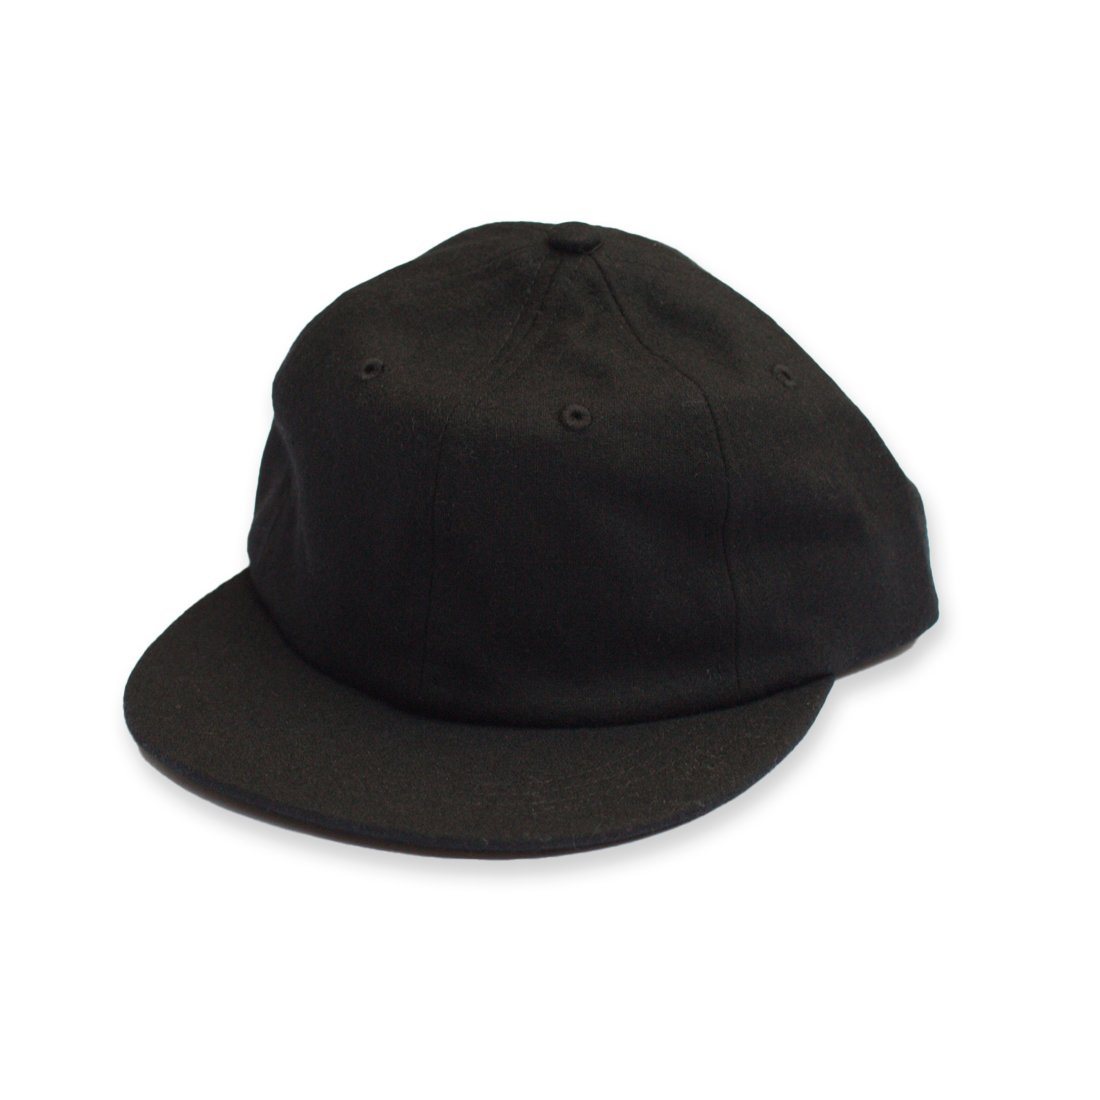 Yellow 108 Limited Edition Parker Cap, Black Wool